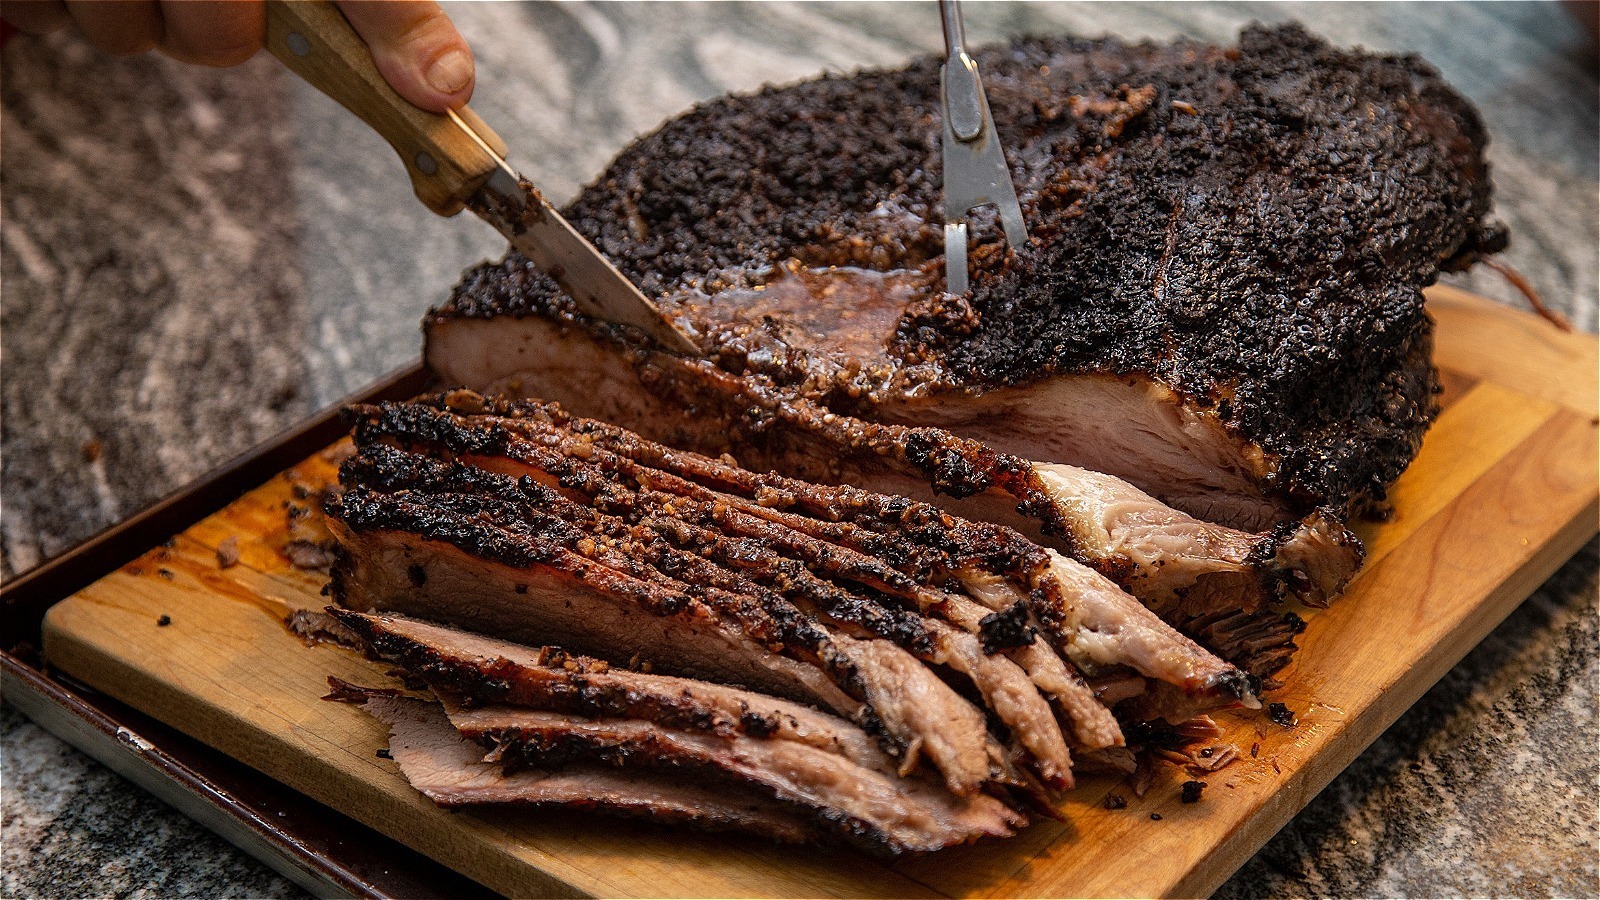 For The Perfect Smoked Meat, Pay Attention To The Type Of Smoke